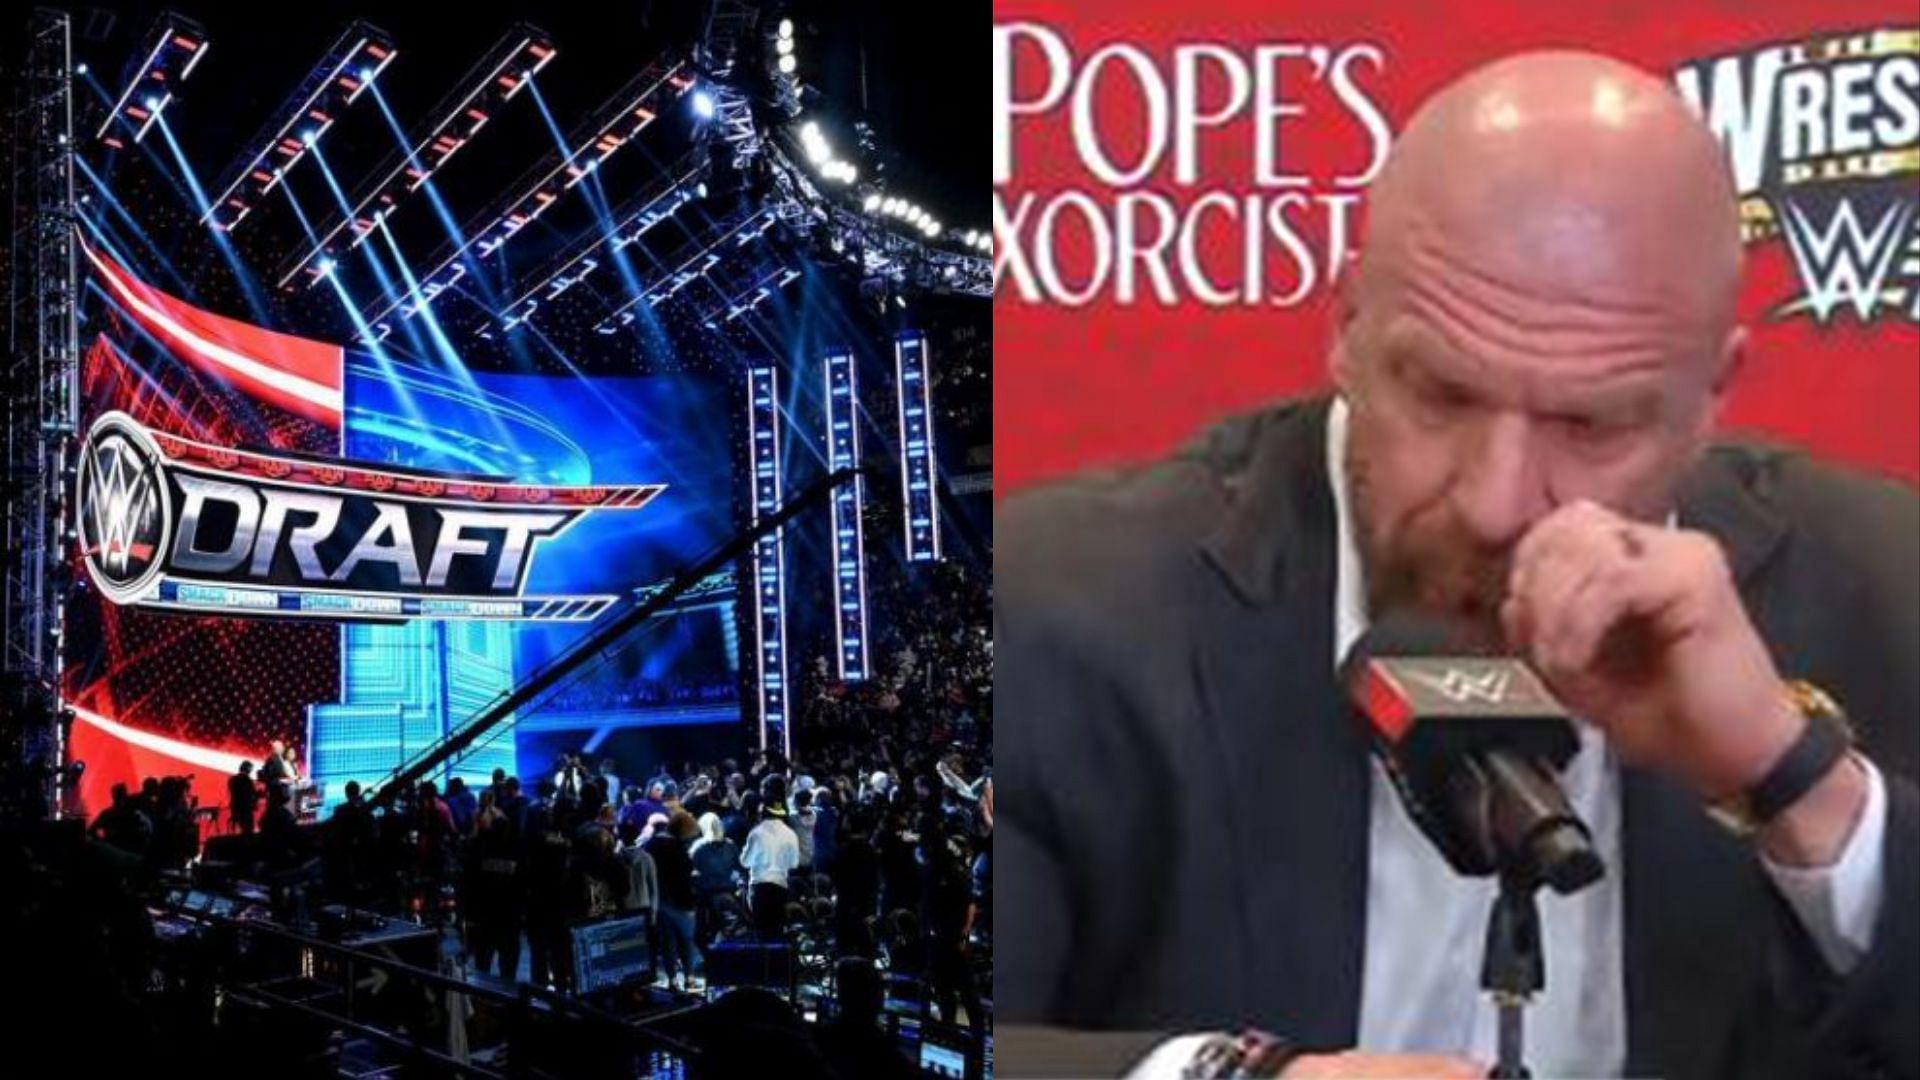 Triple H might have some big plans for the WWE Draft